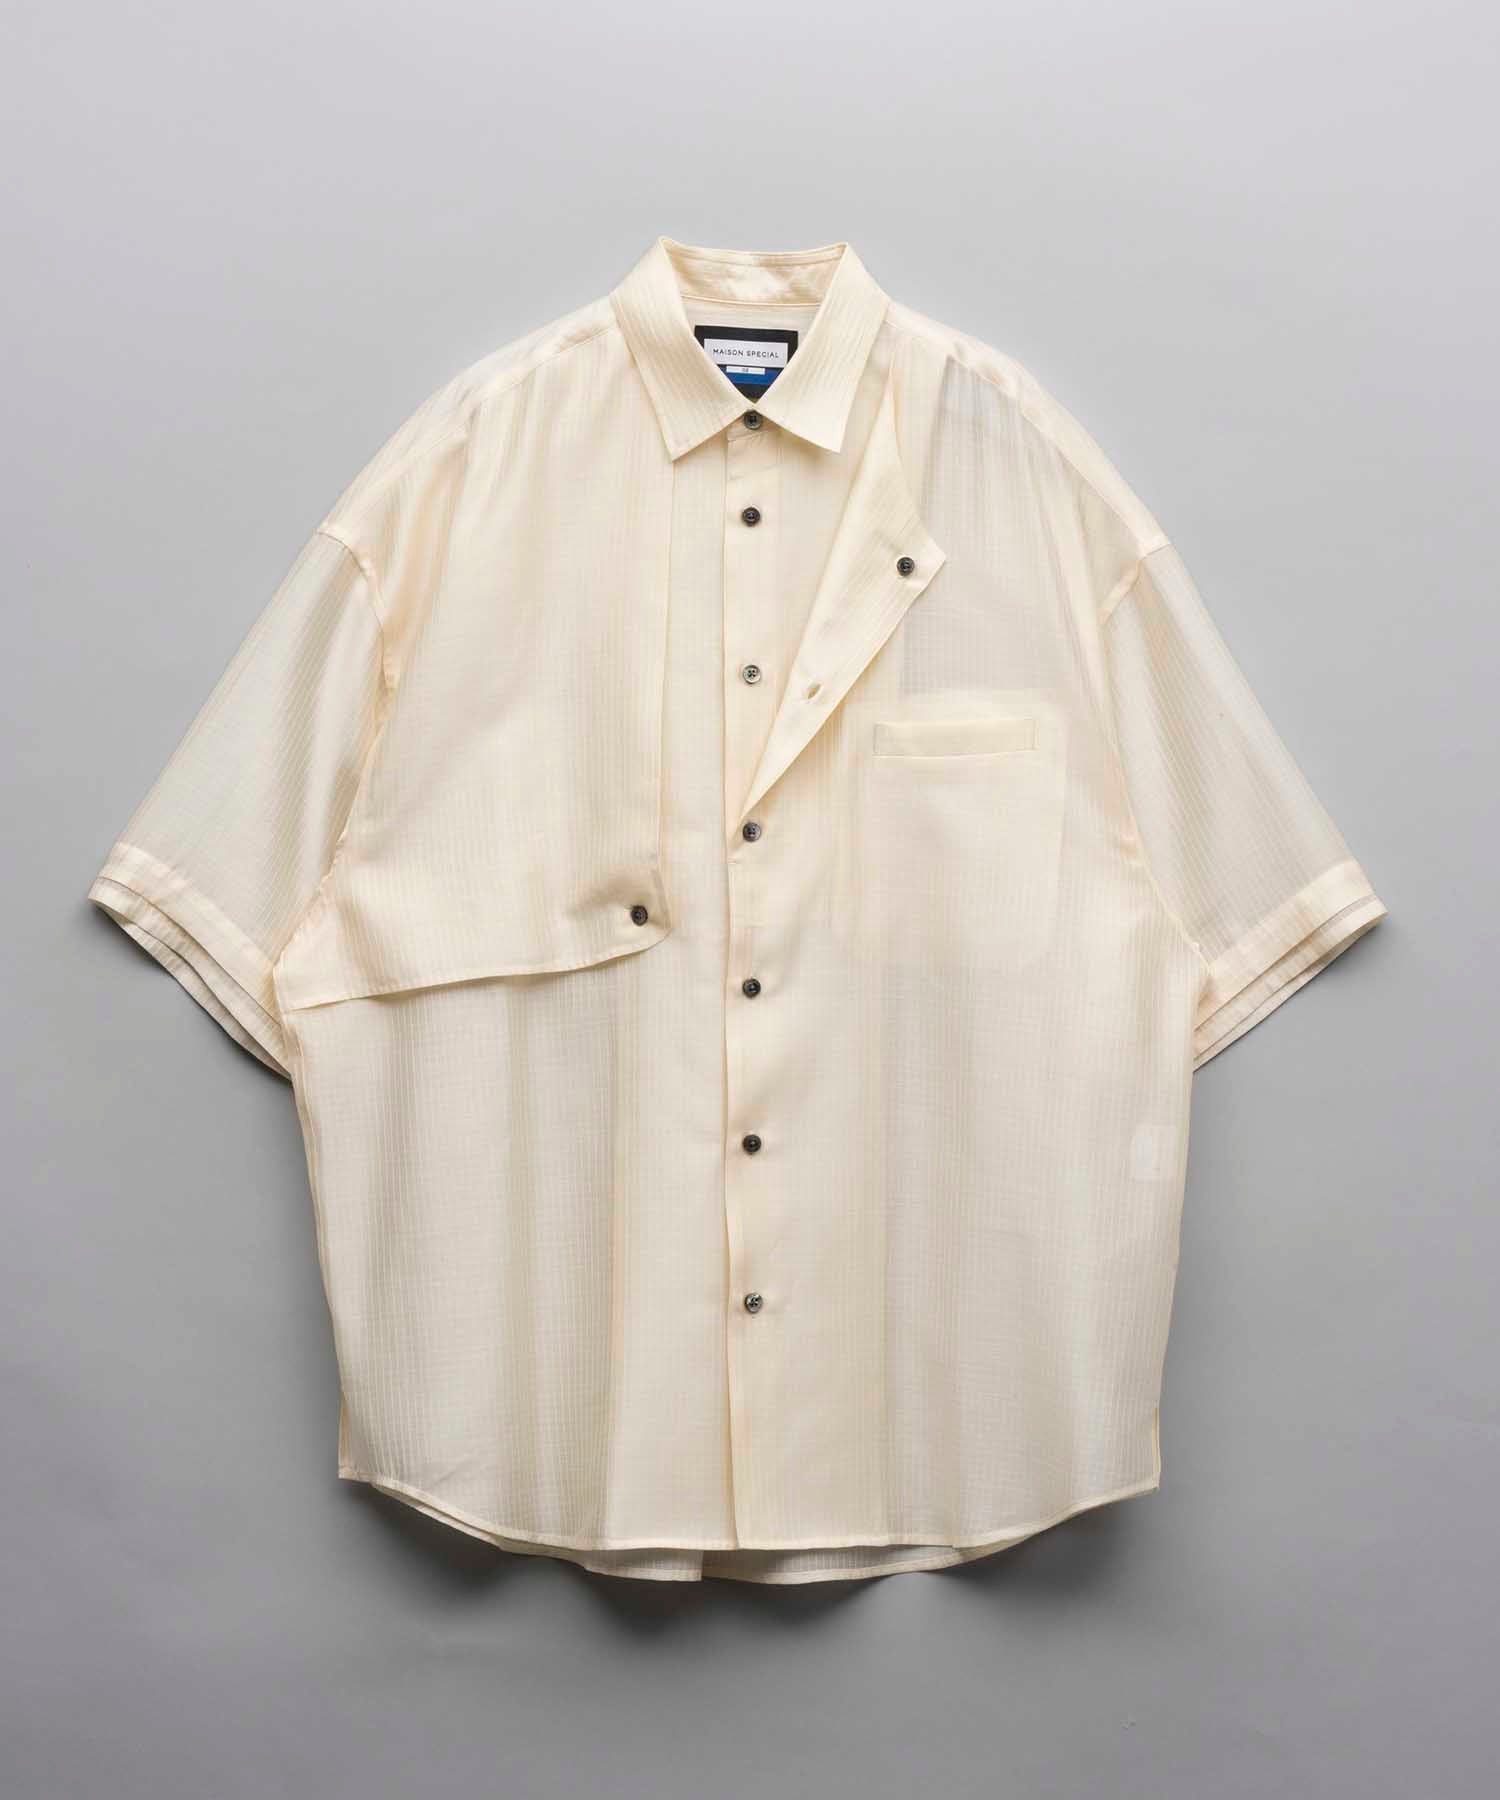 Prime-Over Layering Short Sleeve Shirt